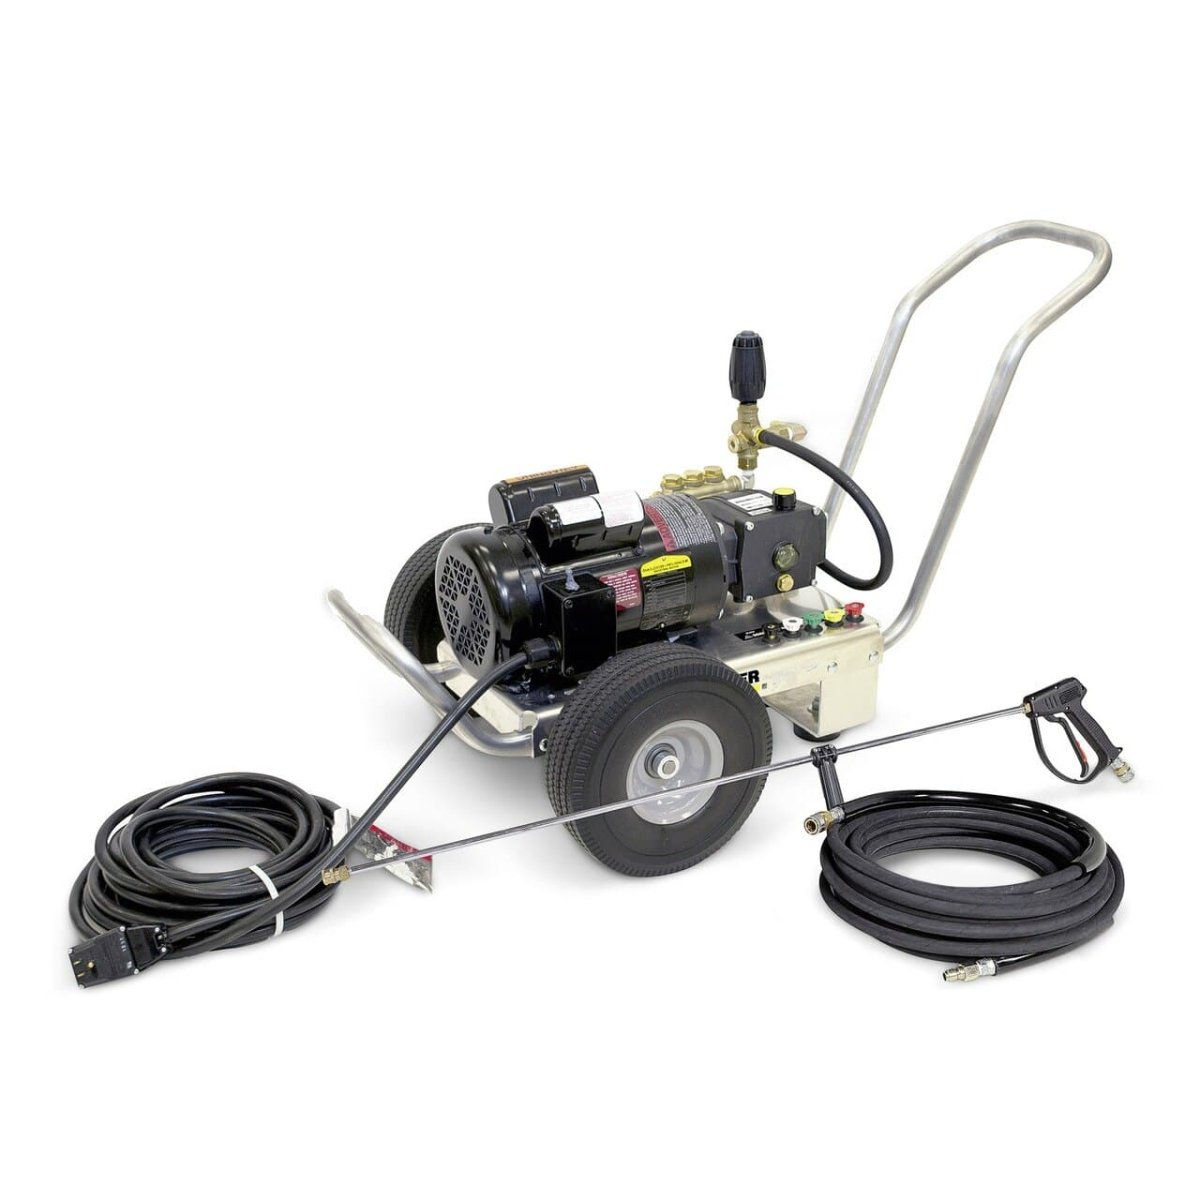 Kärcher - Commercial Electric Pressure Washer - Pro HD 400 ED - 1300 PSI -  With EASY! Force Trigger Gun - 1.7 GPM